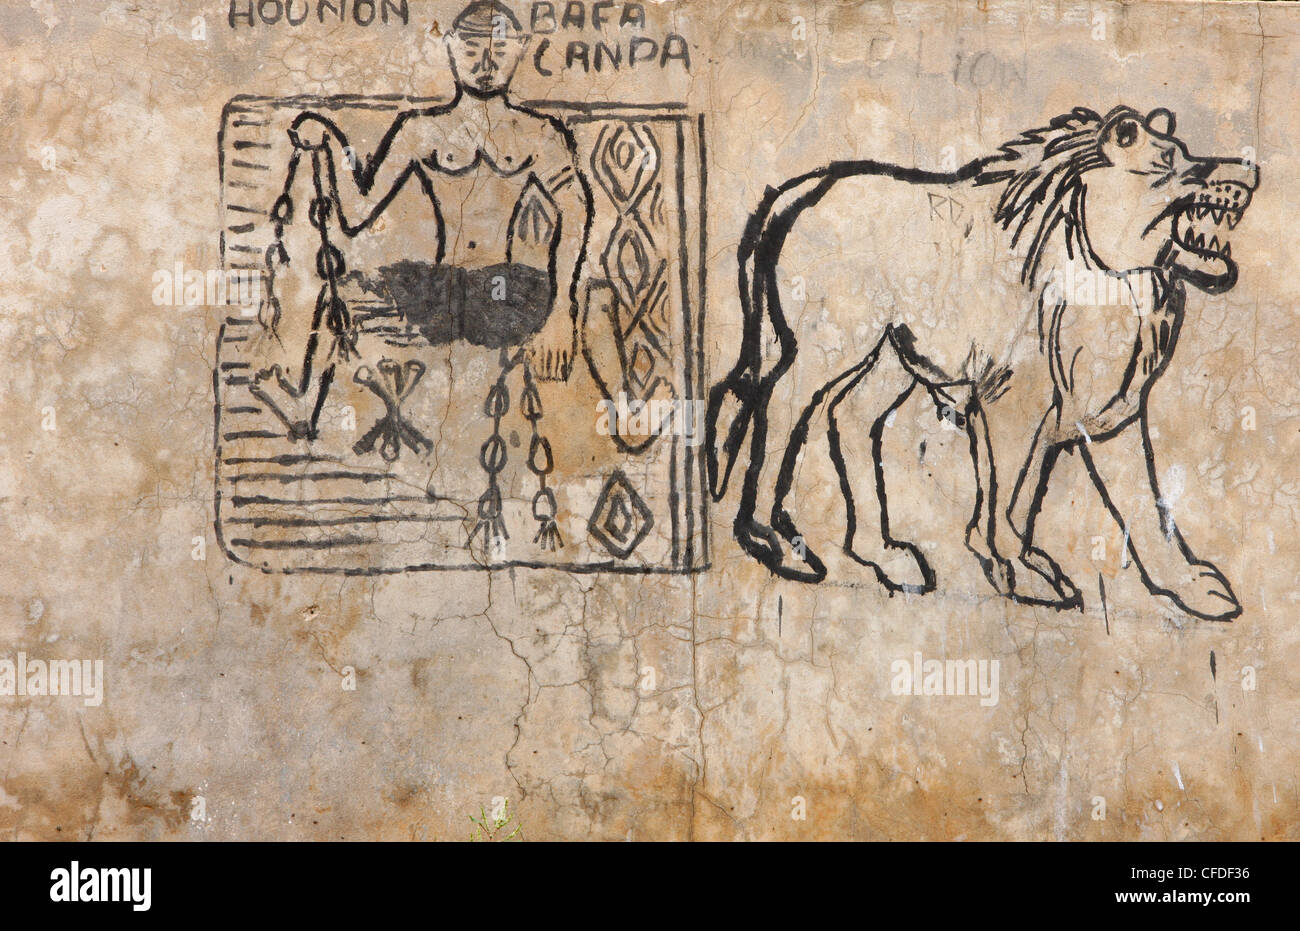 Wall painting,a Voodoo sorcerer, Lome, Togo, West Africa, Africa Stock Photo